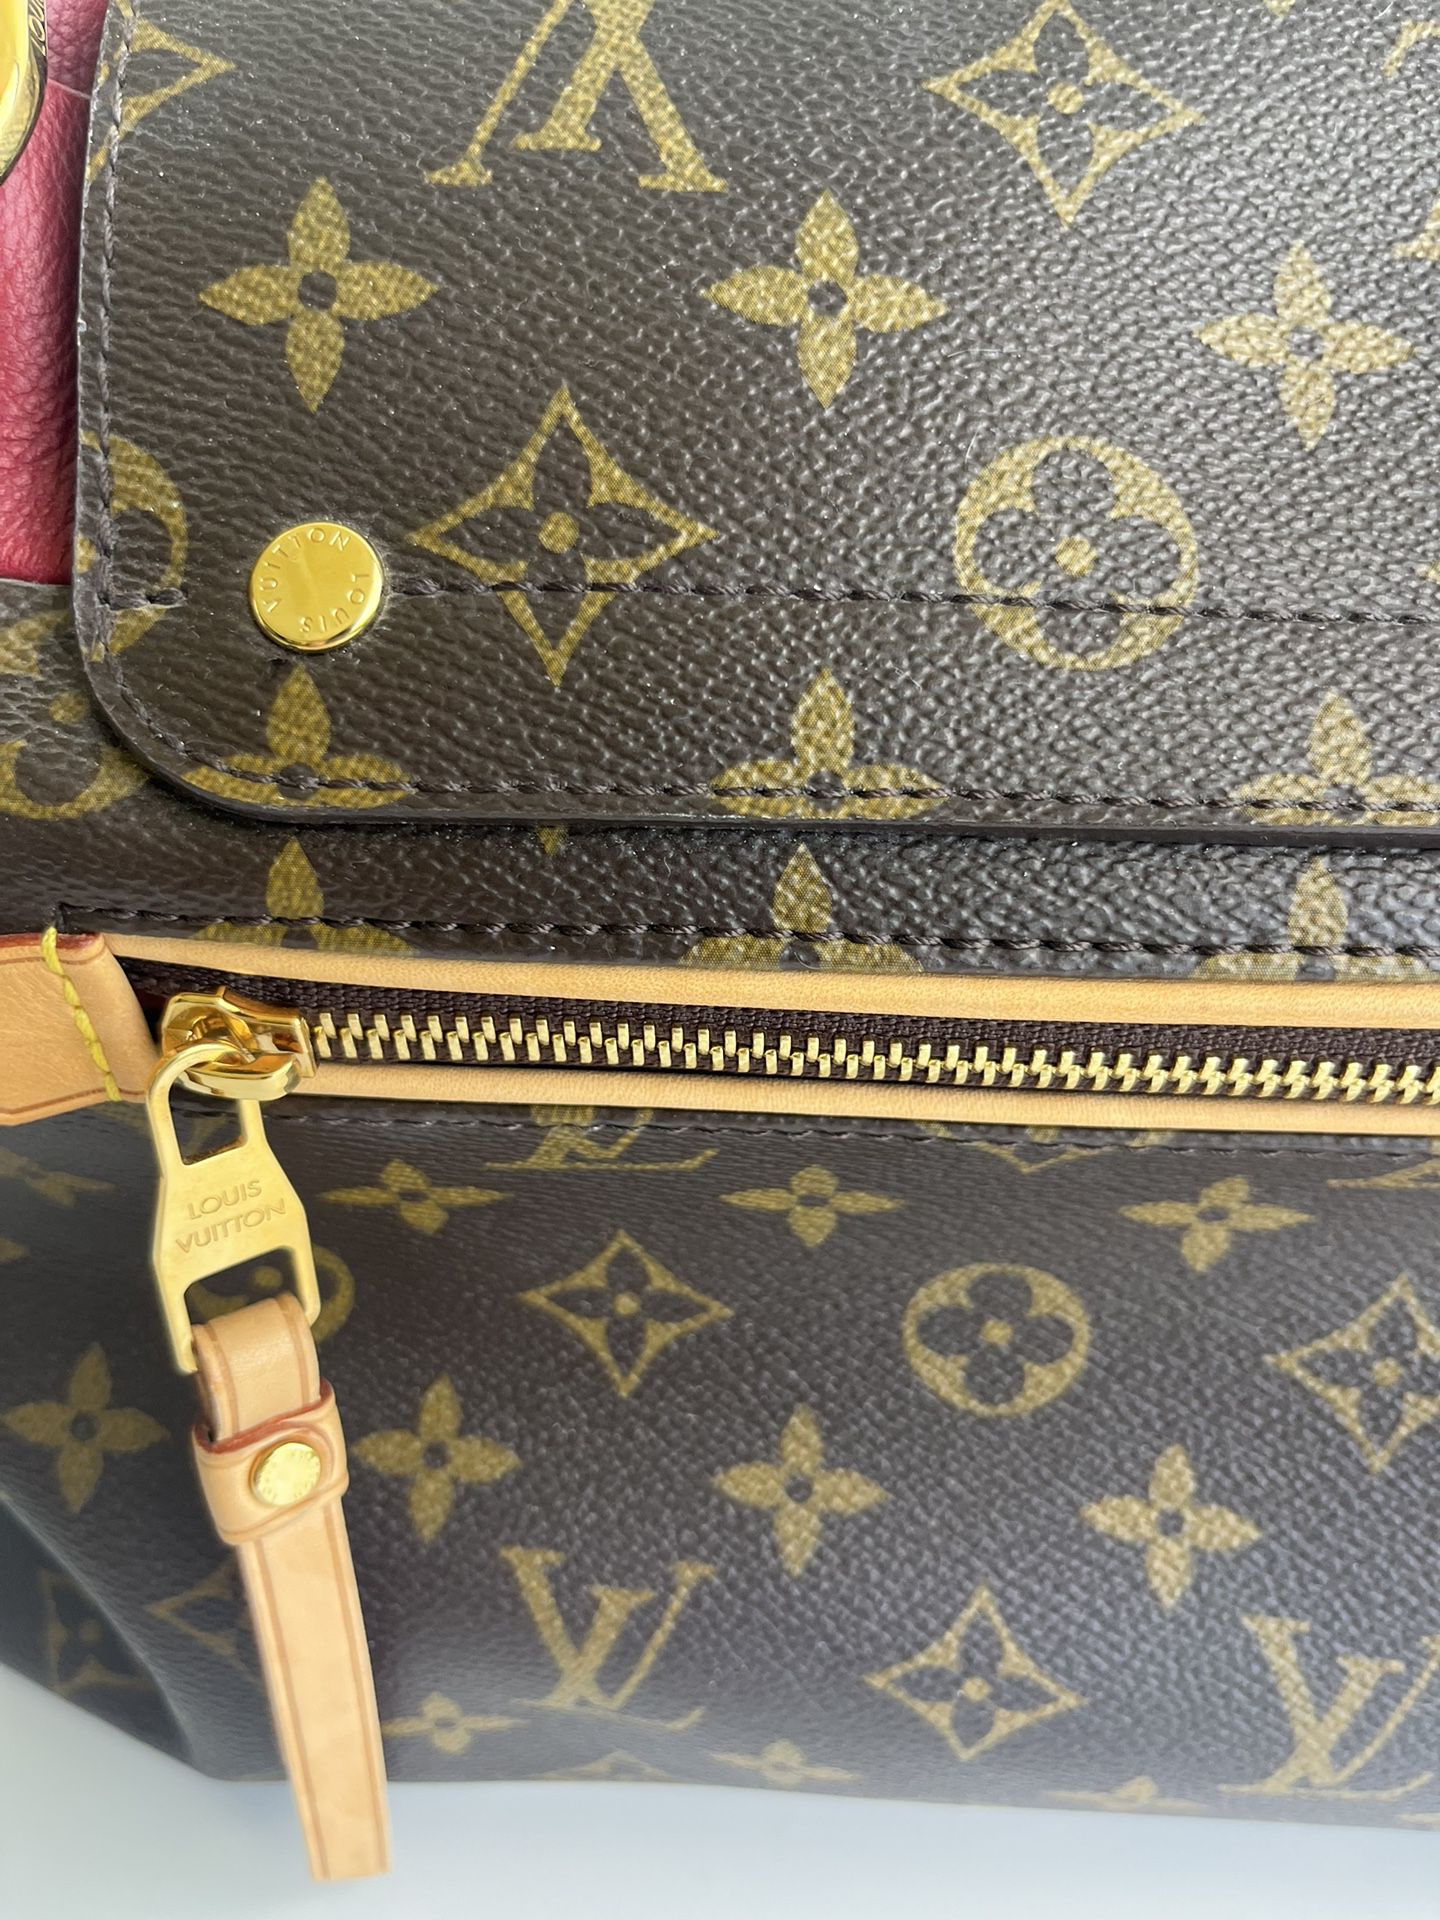 Luxury LV Carry-on Bag for Sale in Boca Raton, FL - OfferUp